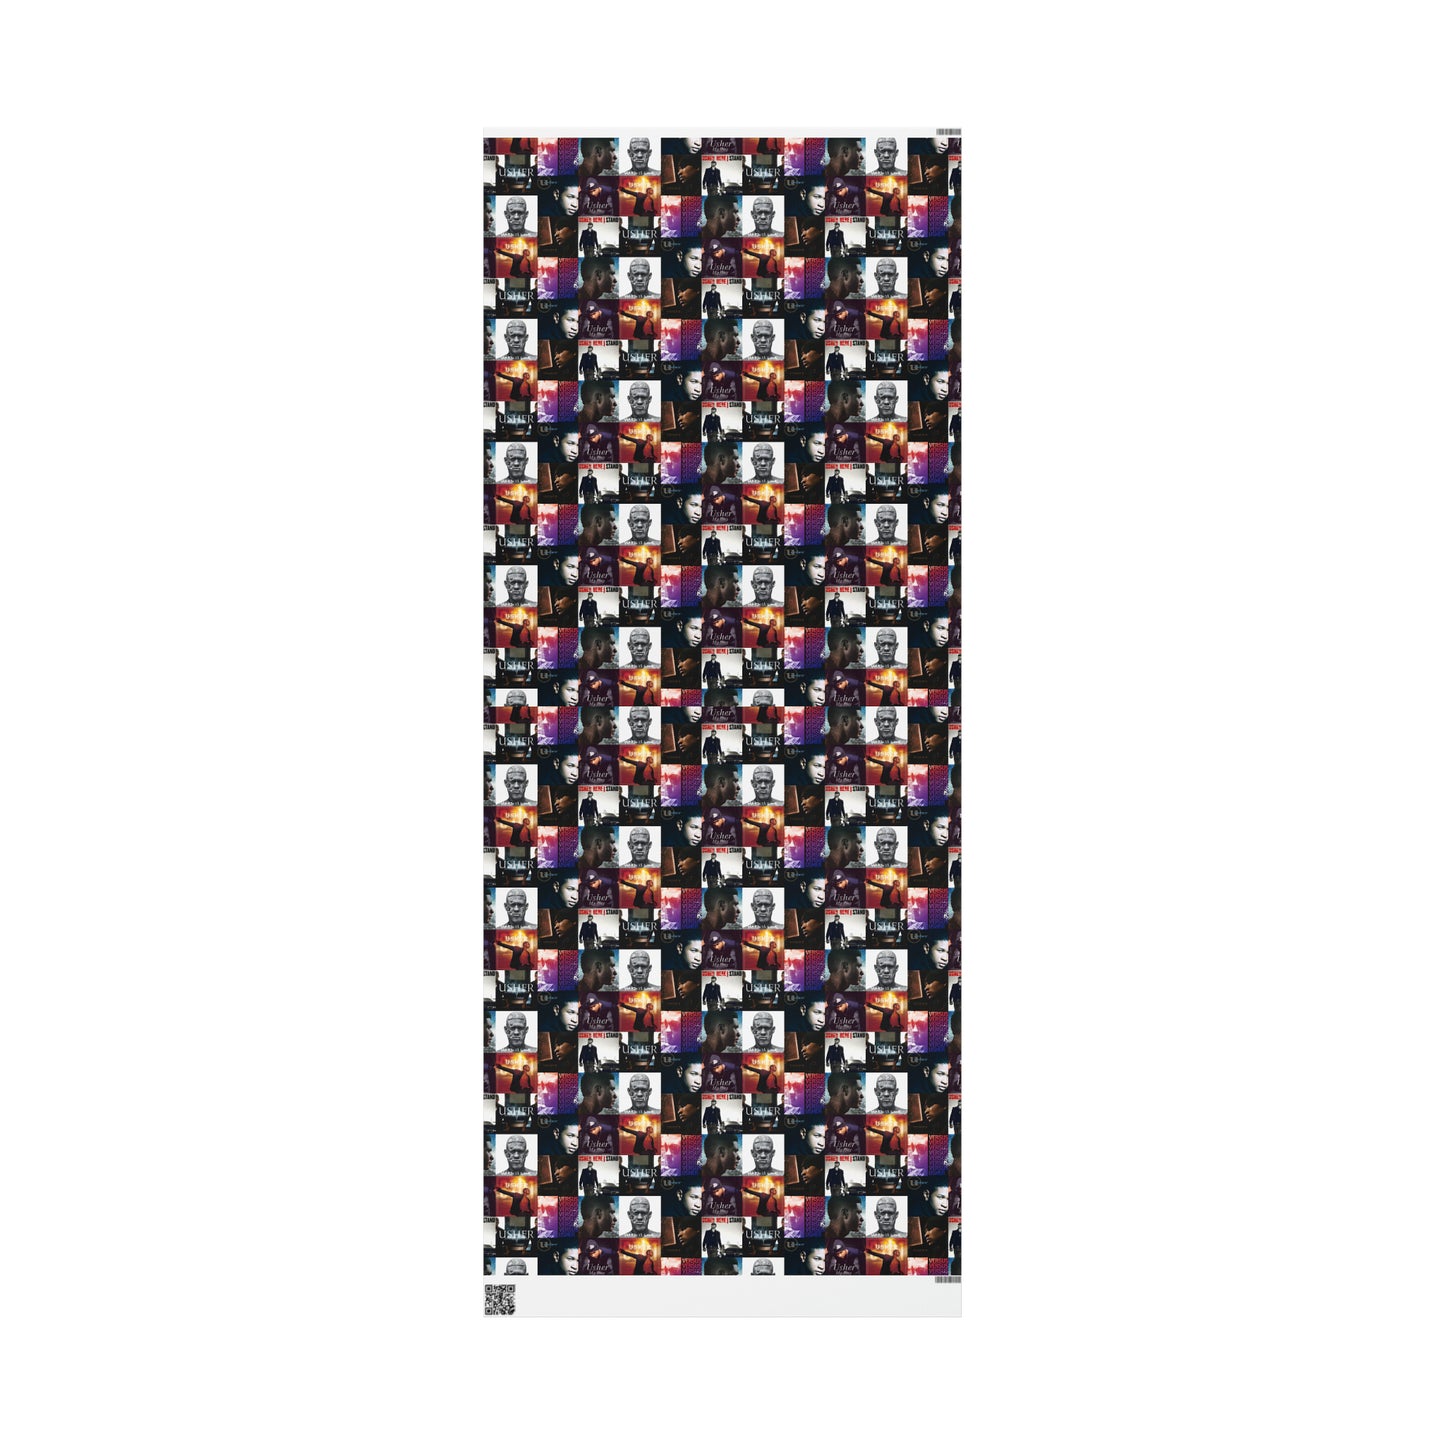 Usher Album Cover Art Mosaic Gift Wrapping Paper